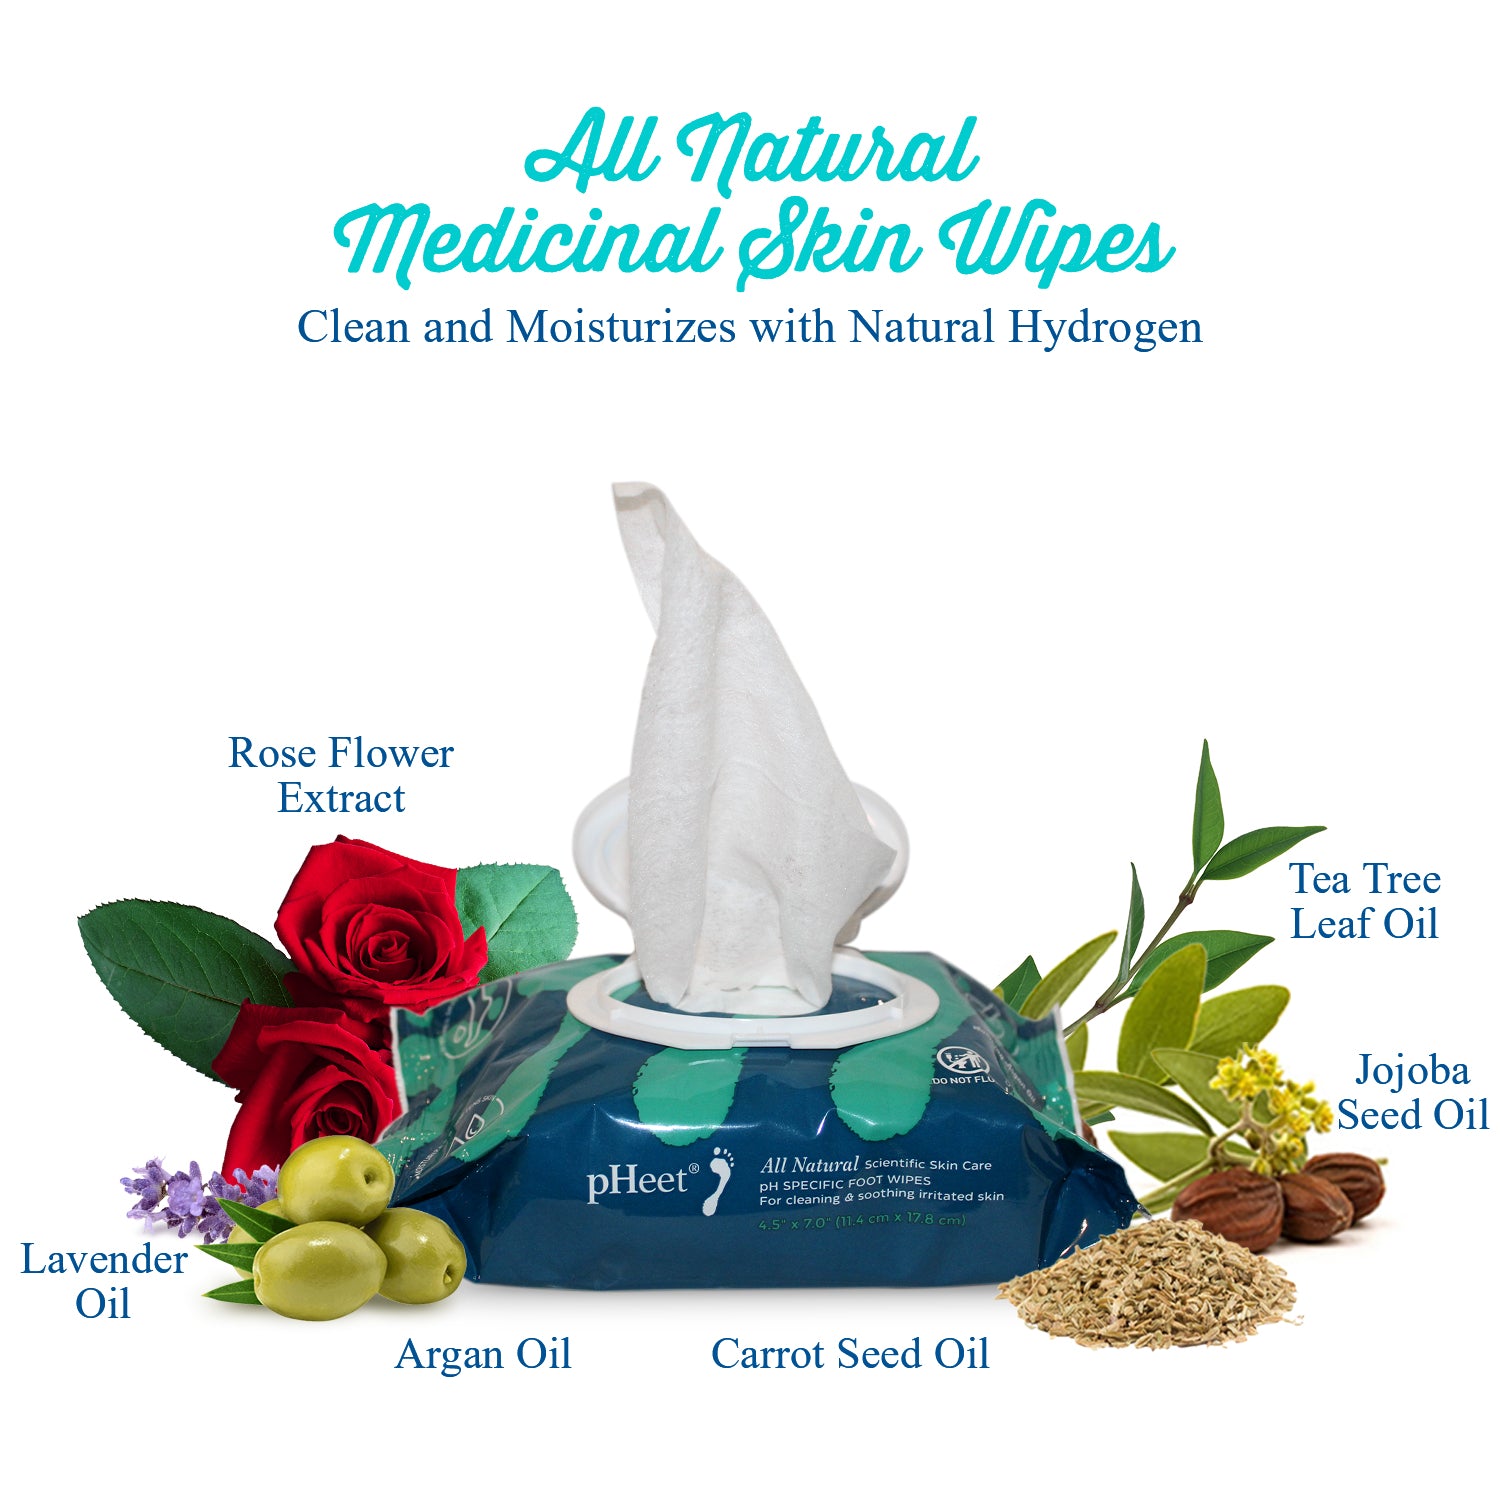 All Natural Medicinal Skin Wipes. Cleans and moistruizes with natural hydrogen. Some ingredients it contains are rose flower extract, lavender oil, argan oil, carrot seed oil, tea tree leaf oil and jojoba seed oil.